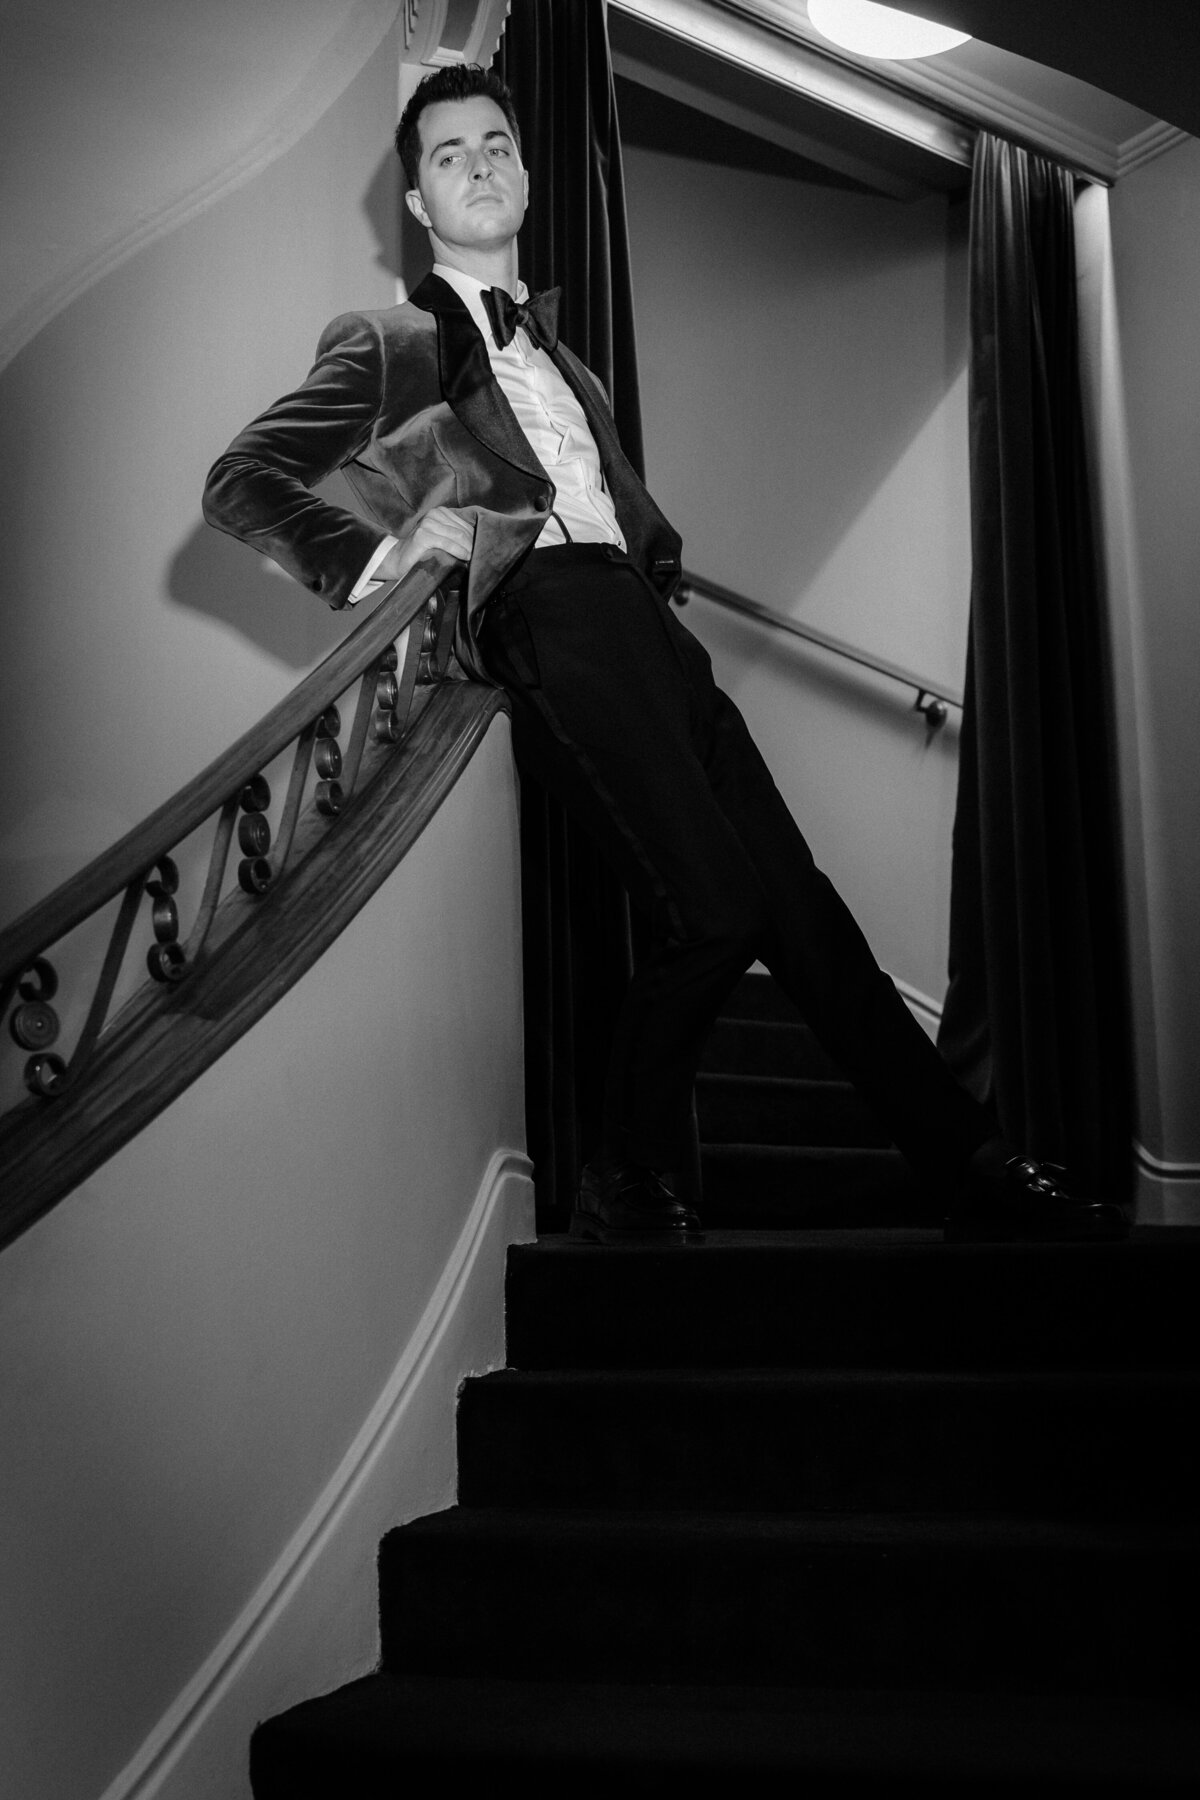 Black and white photo of a groom posing against the hand rail of a staircase.